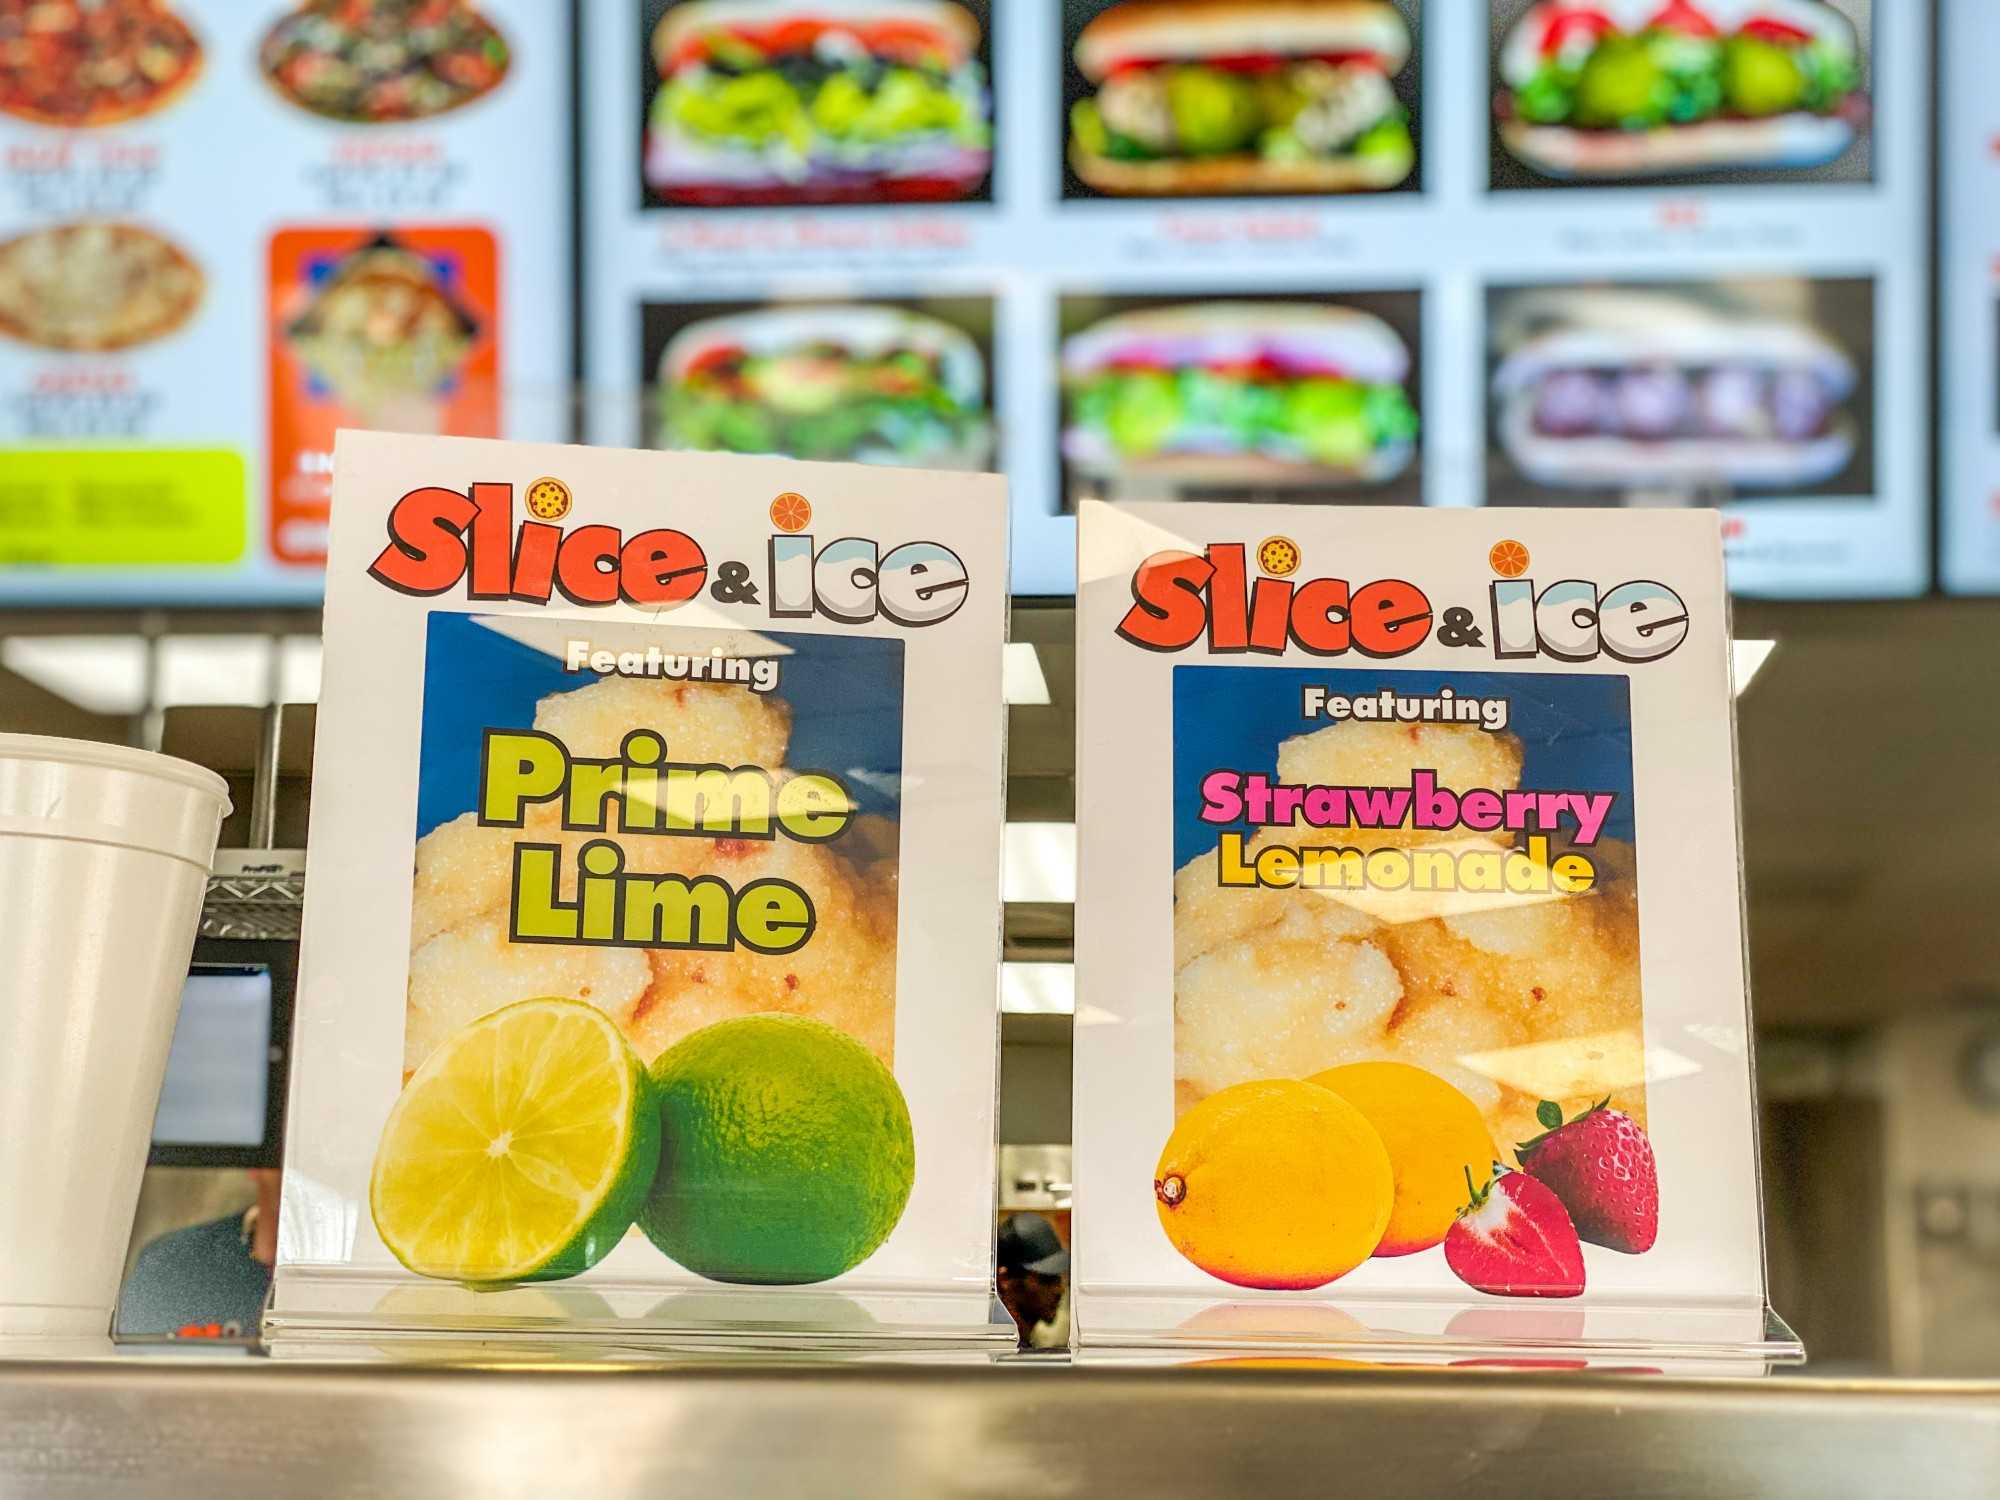 Slice & Ice is a new restaurant in Tucson that serves pizza, sandwiches, fries, salads and Italian ice drinks. Includes a family friendly environment with a diverse, friendly staff and management.